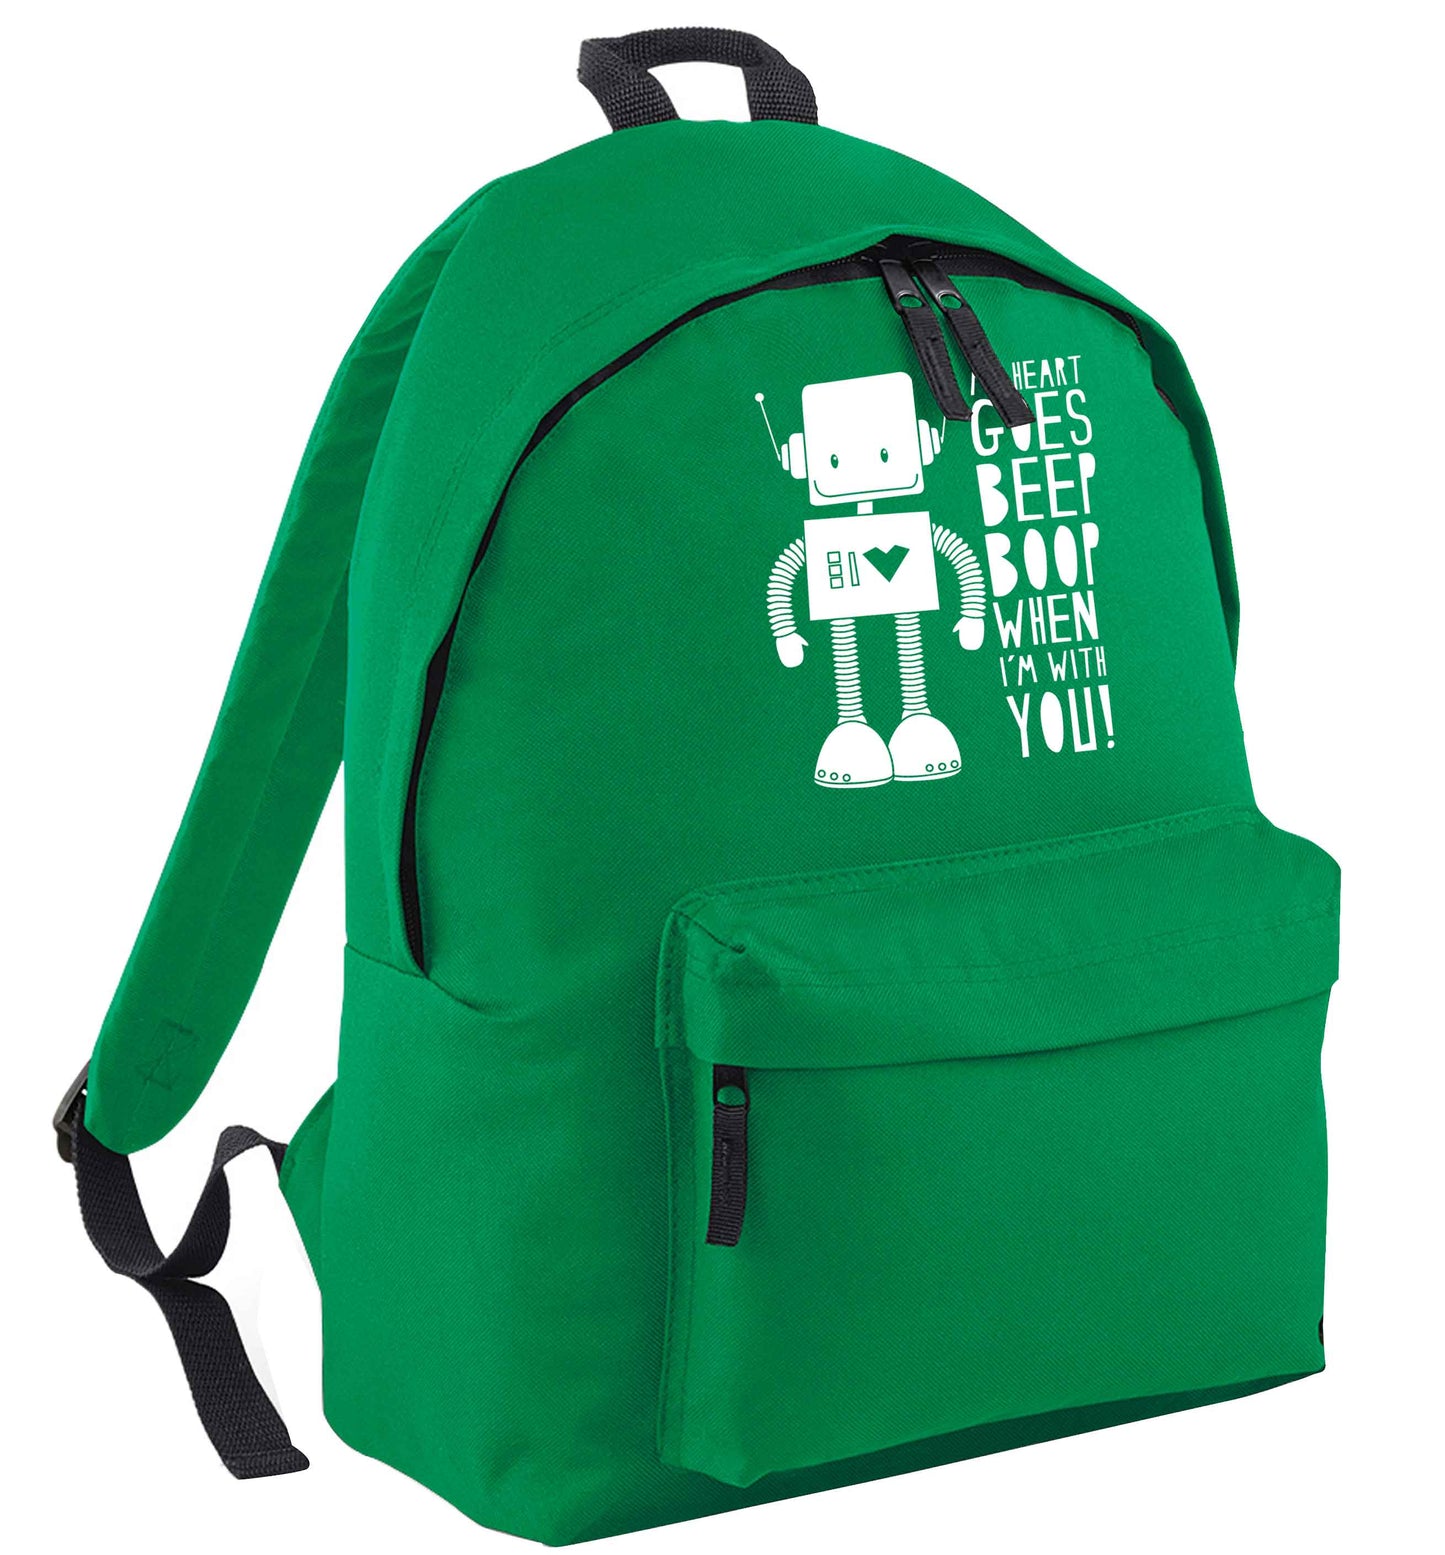 My heart goes beep boop when I'm with you green adults backpack